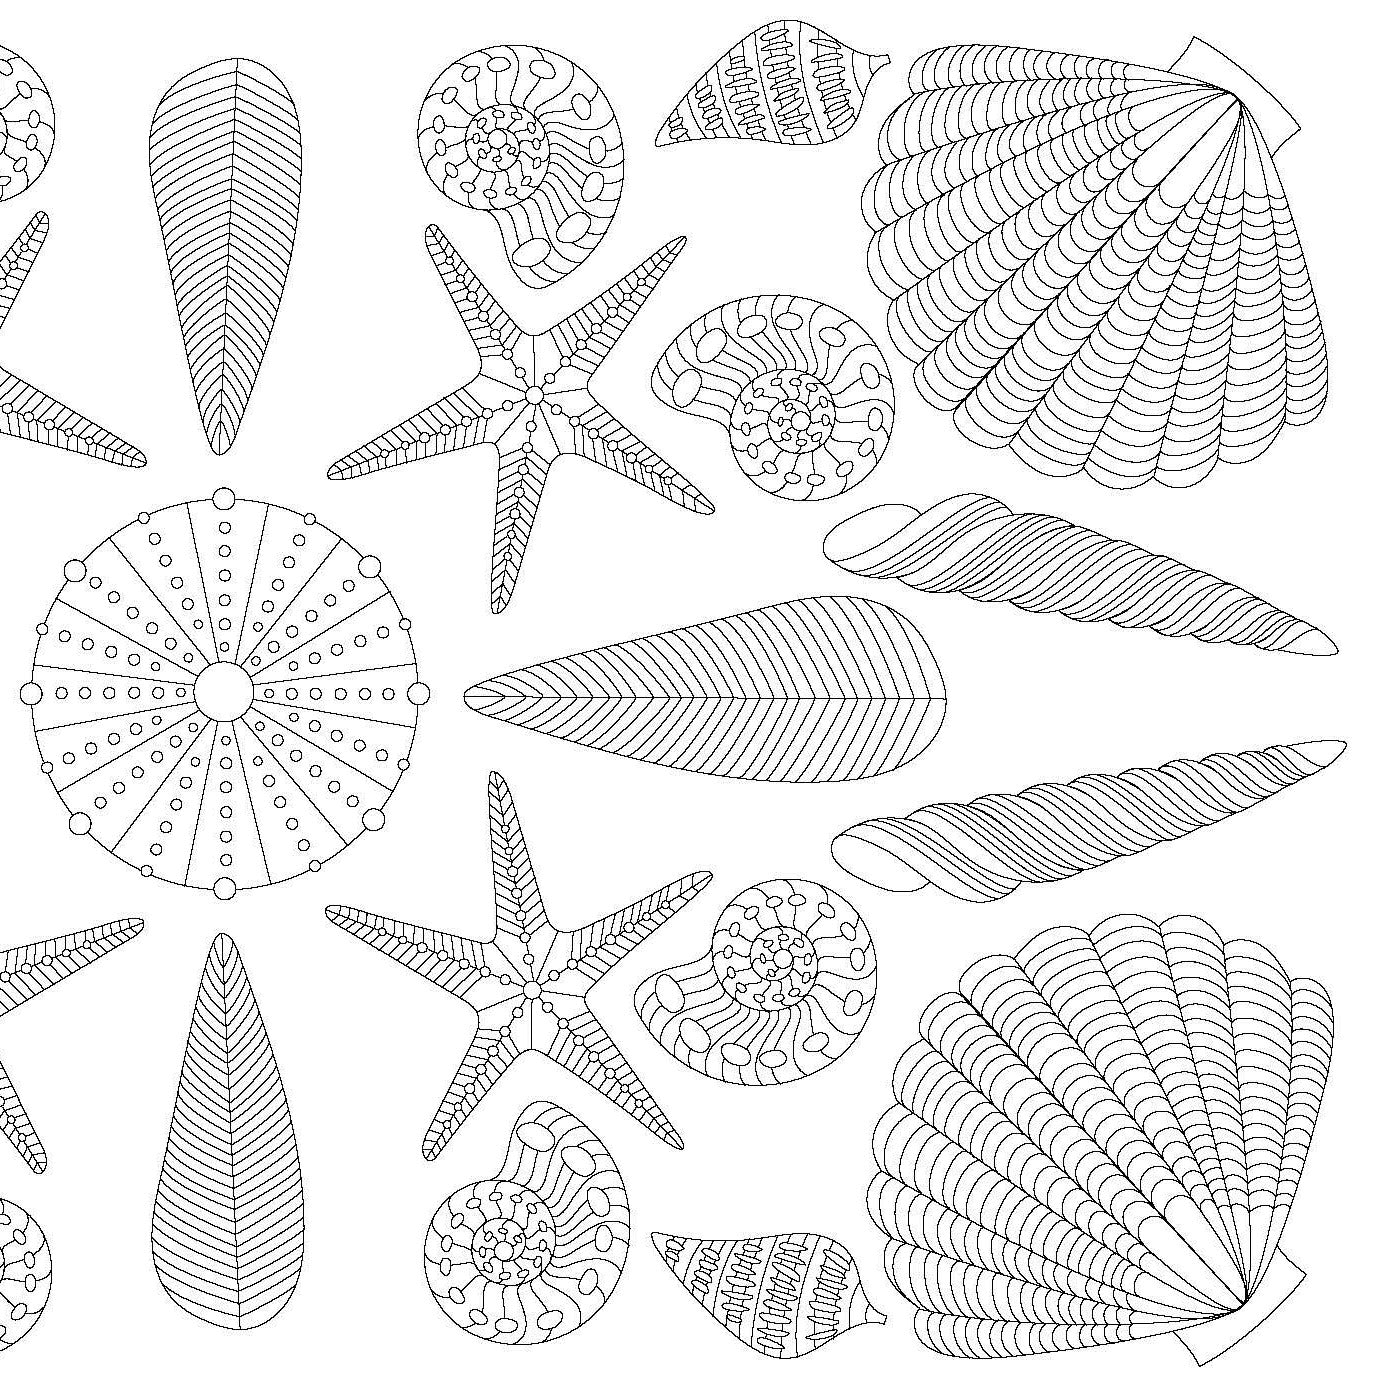 An interior page of the MIndfullness coloring book depicts shells and starfish. 